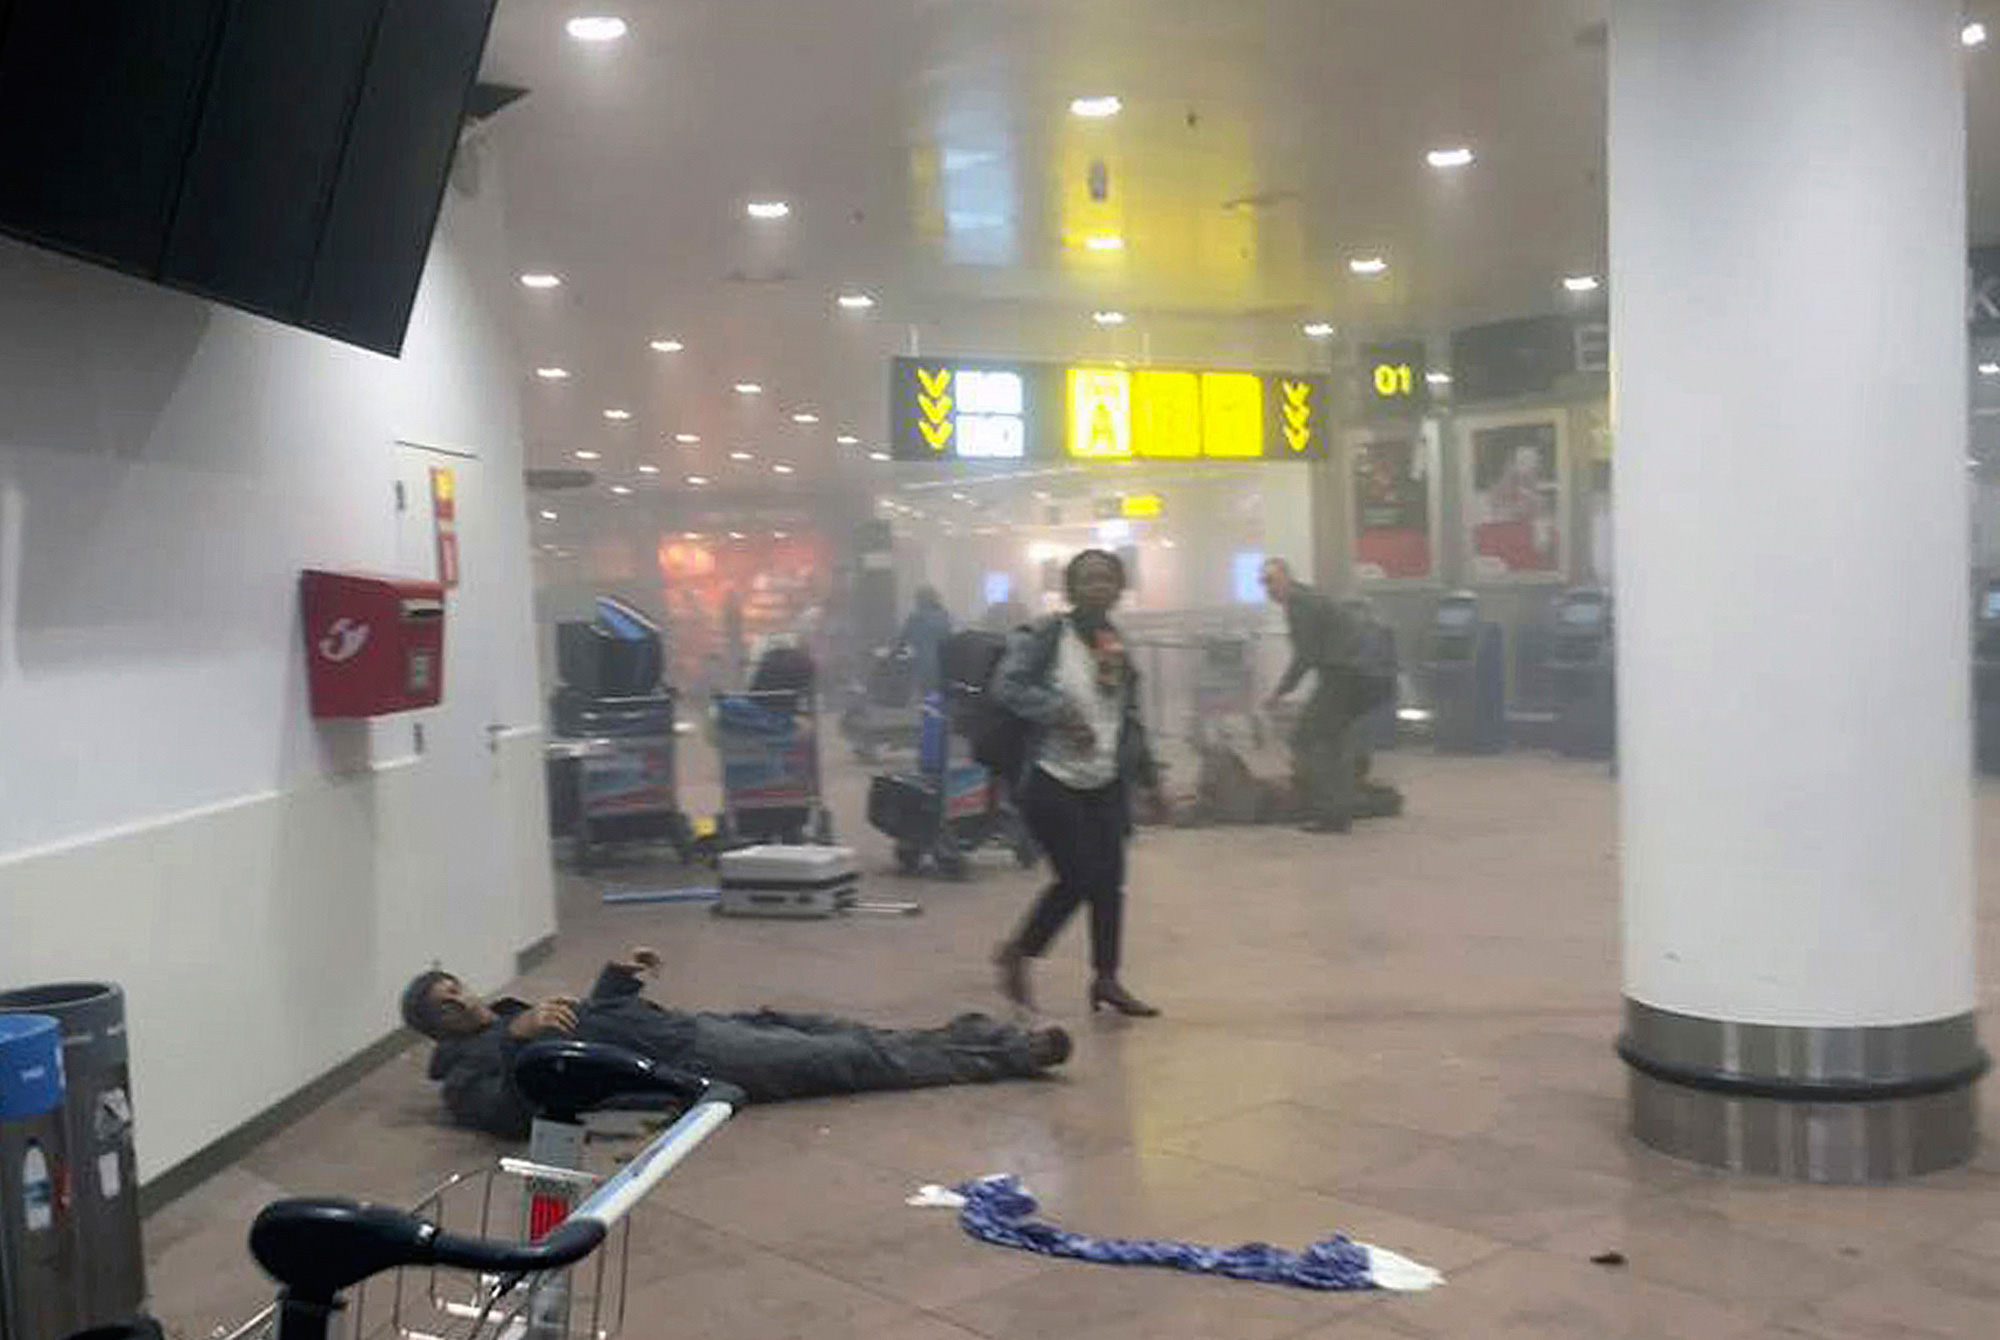 A wounded man lays on the ground after a bomb blast at the airport in Brussels on March 22, 2016 (Ketevan Kardava—Georgian Public Broadcaster/AP)